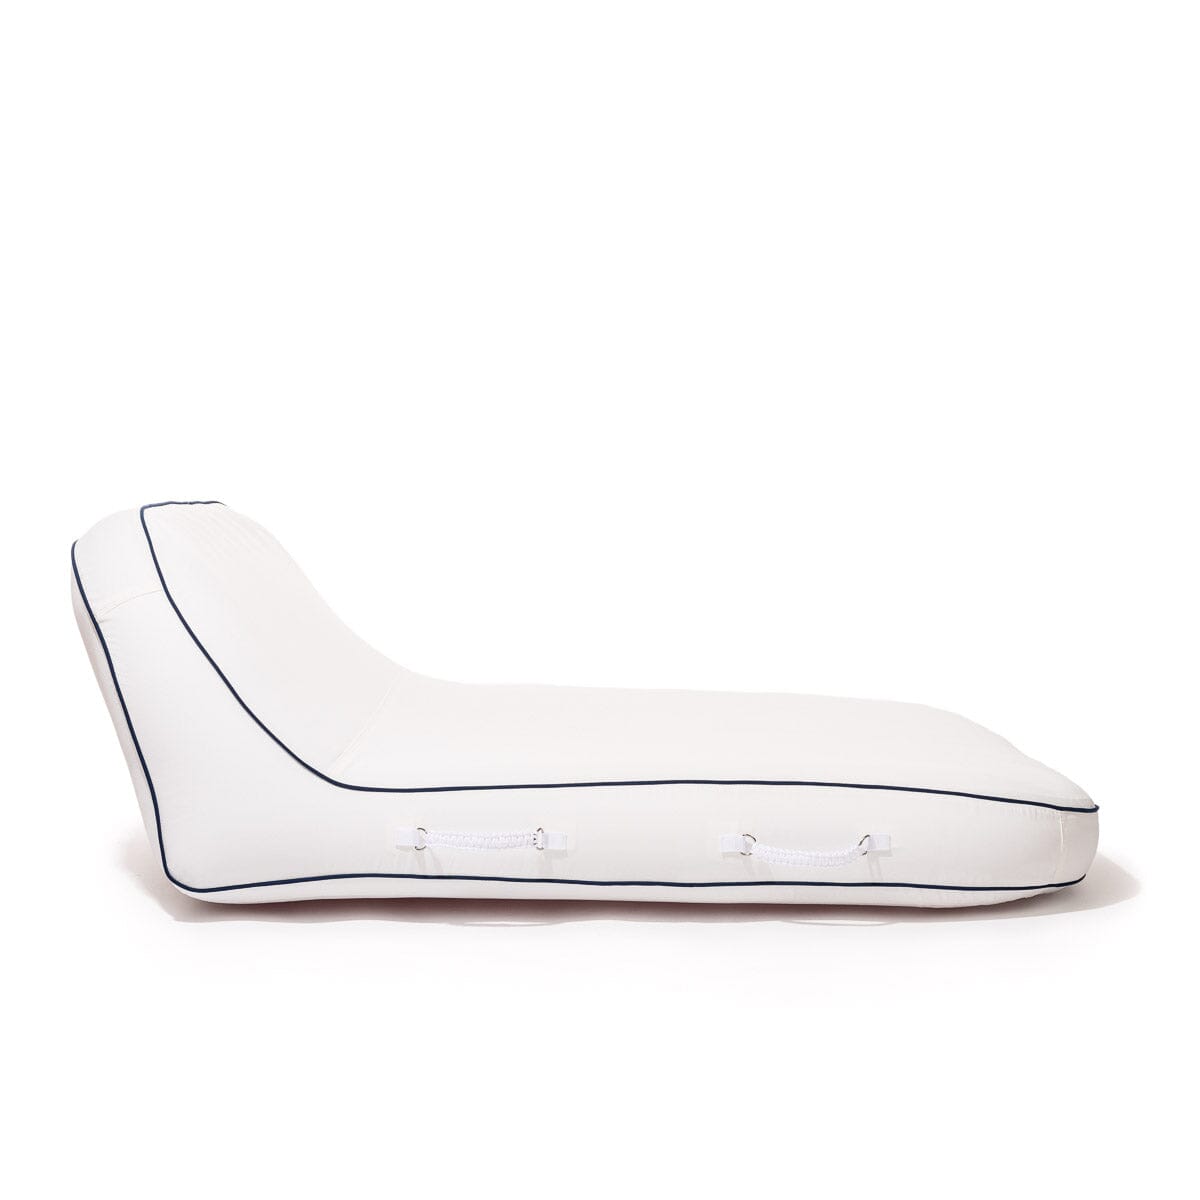 The XL Pool Lounger - Rivie White Pool Lounger Business & Pleasure Co Aus 